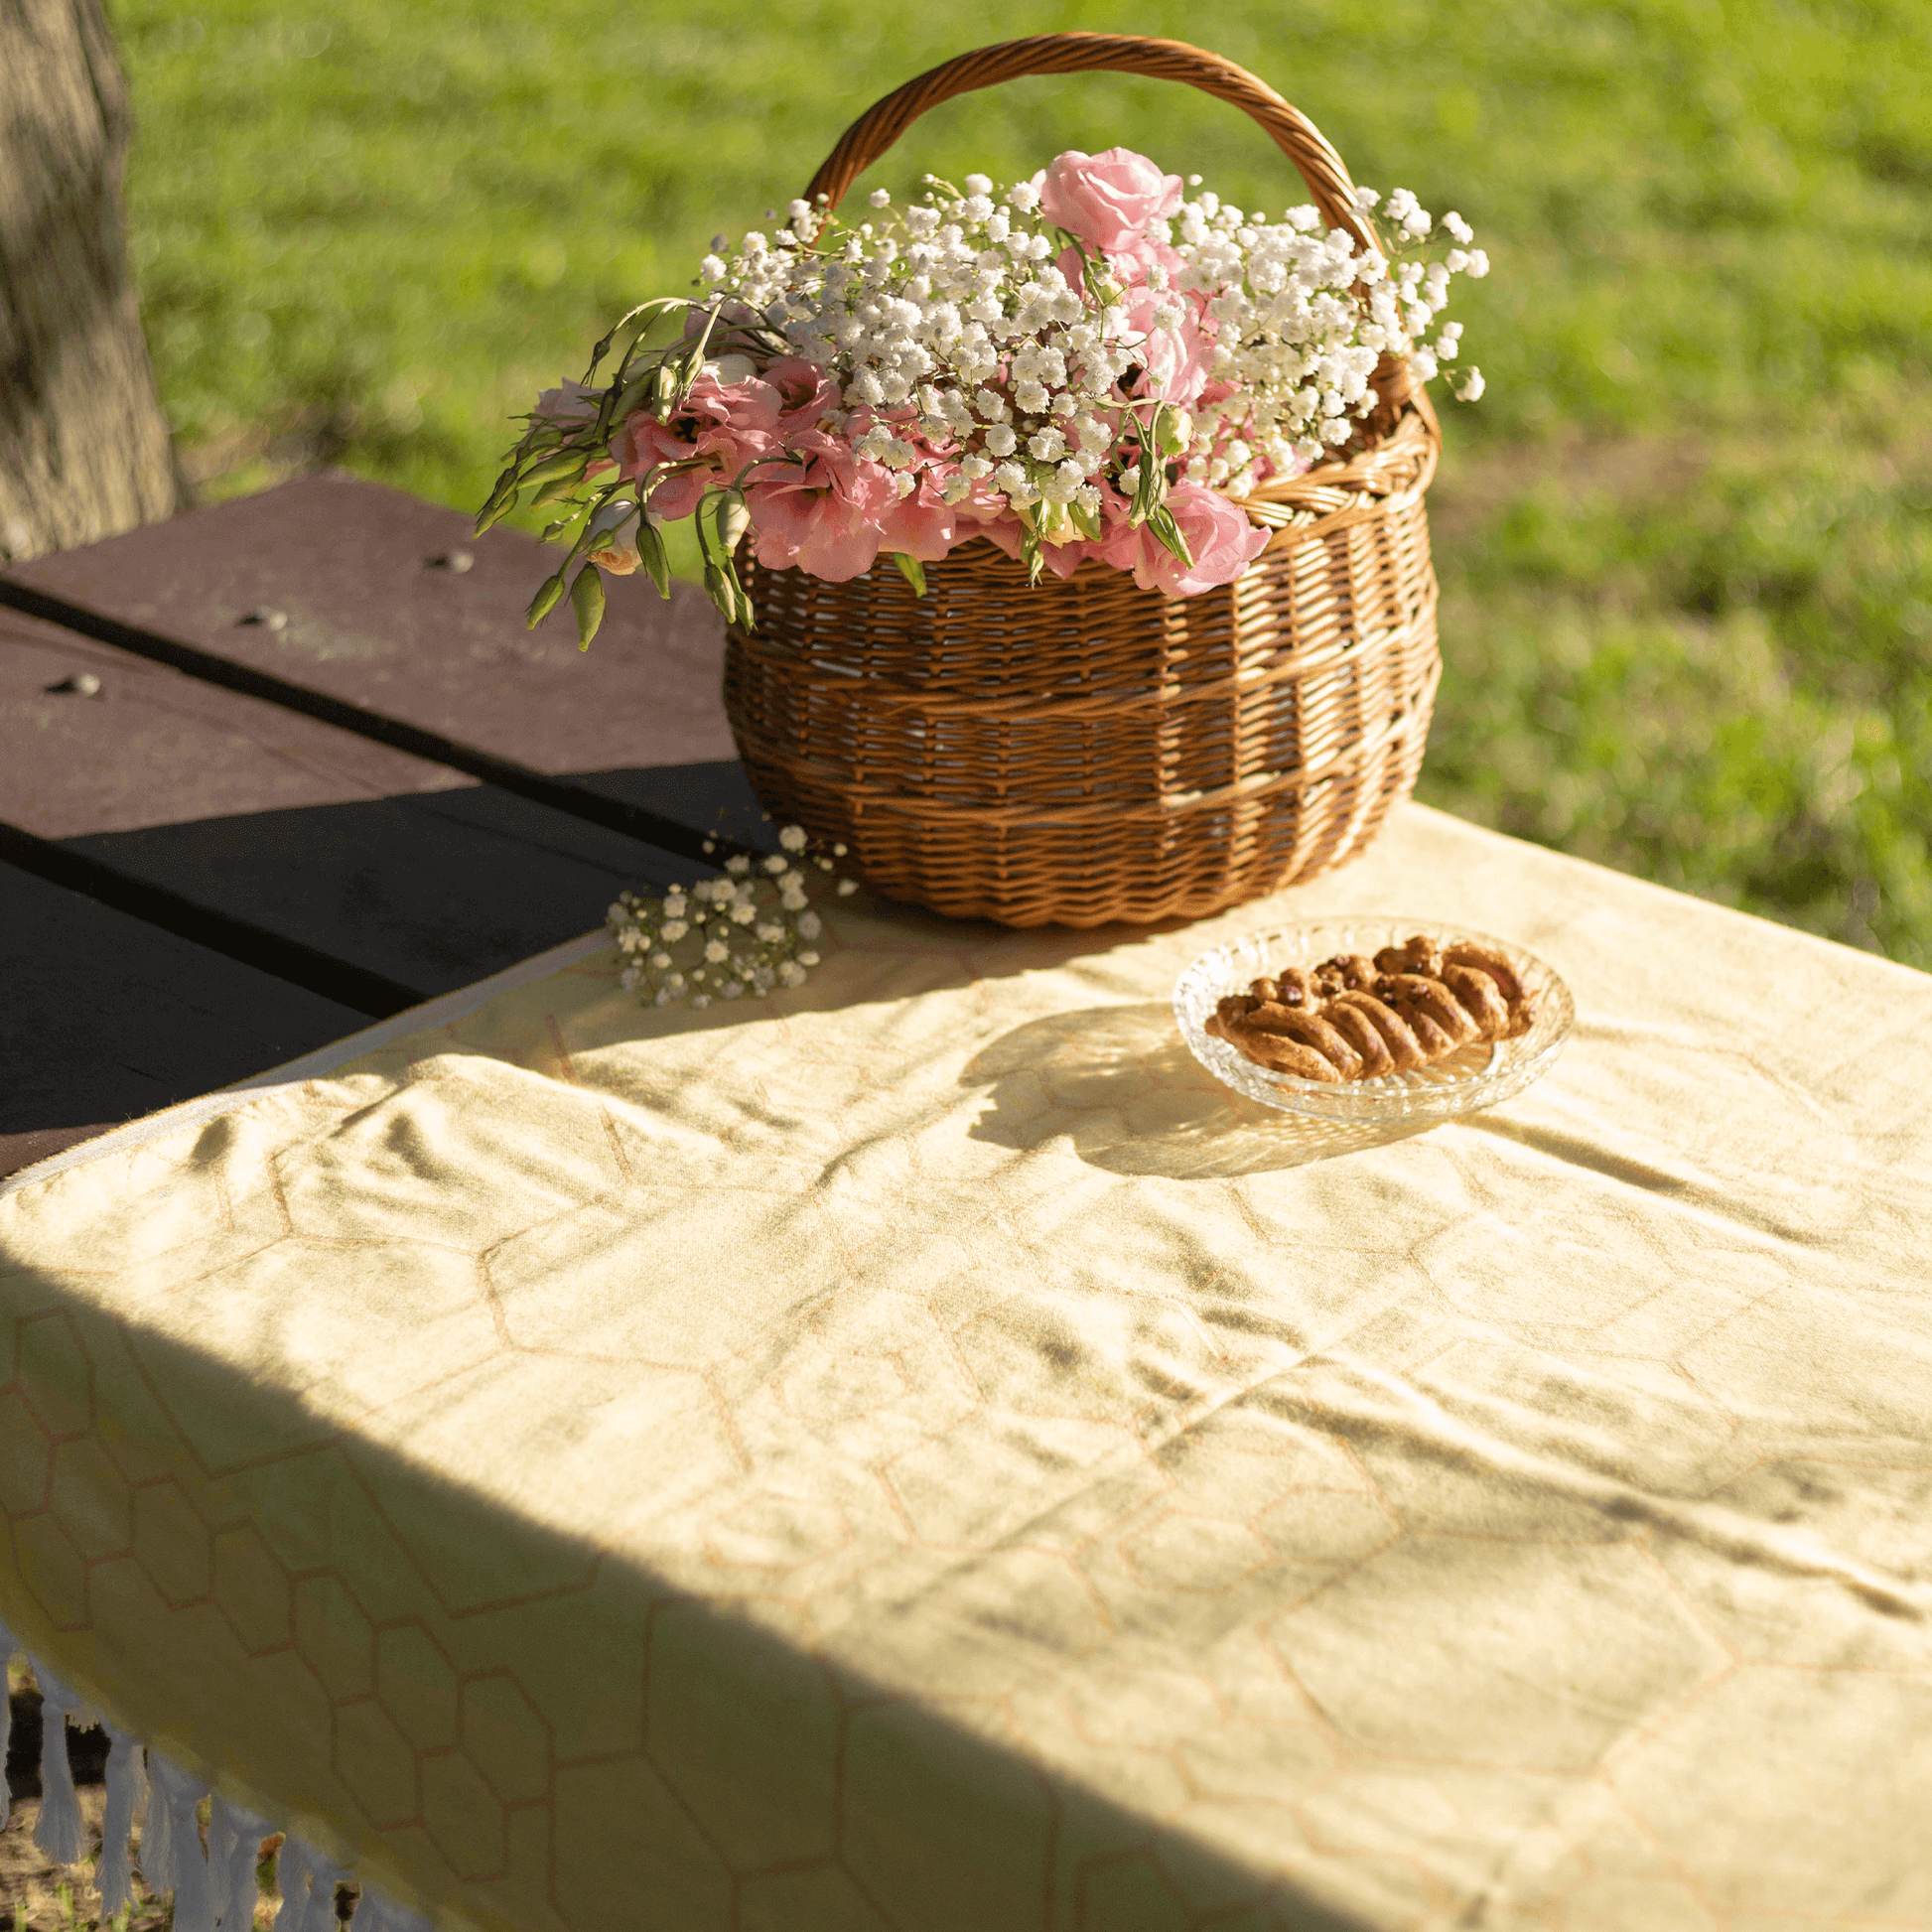 Yellow and orange Turkish towel as a picnic tablecloth